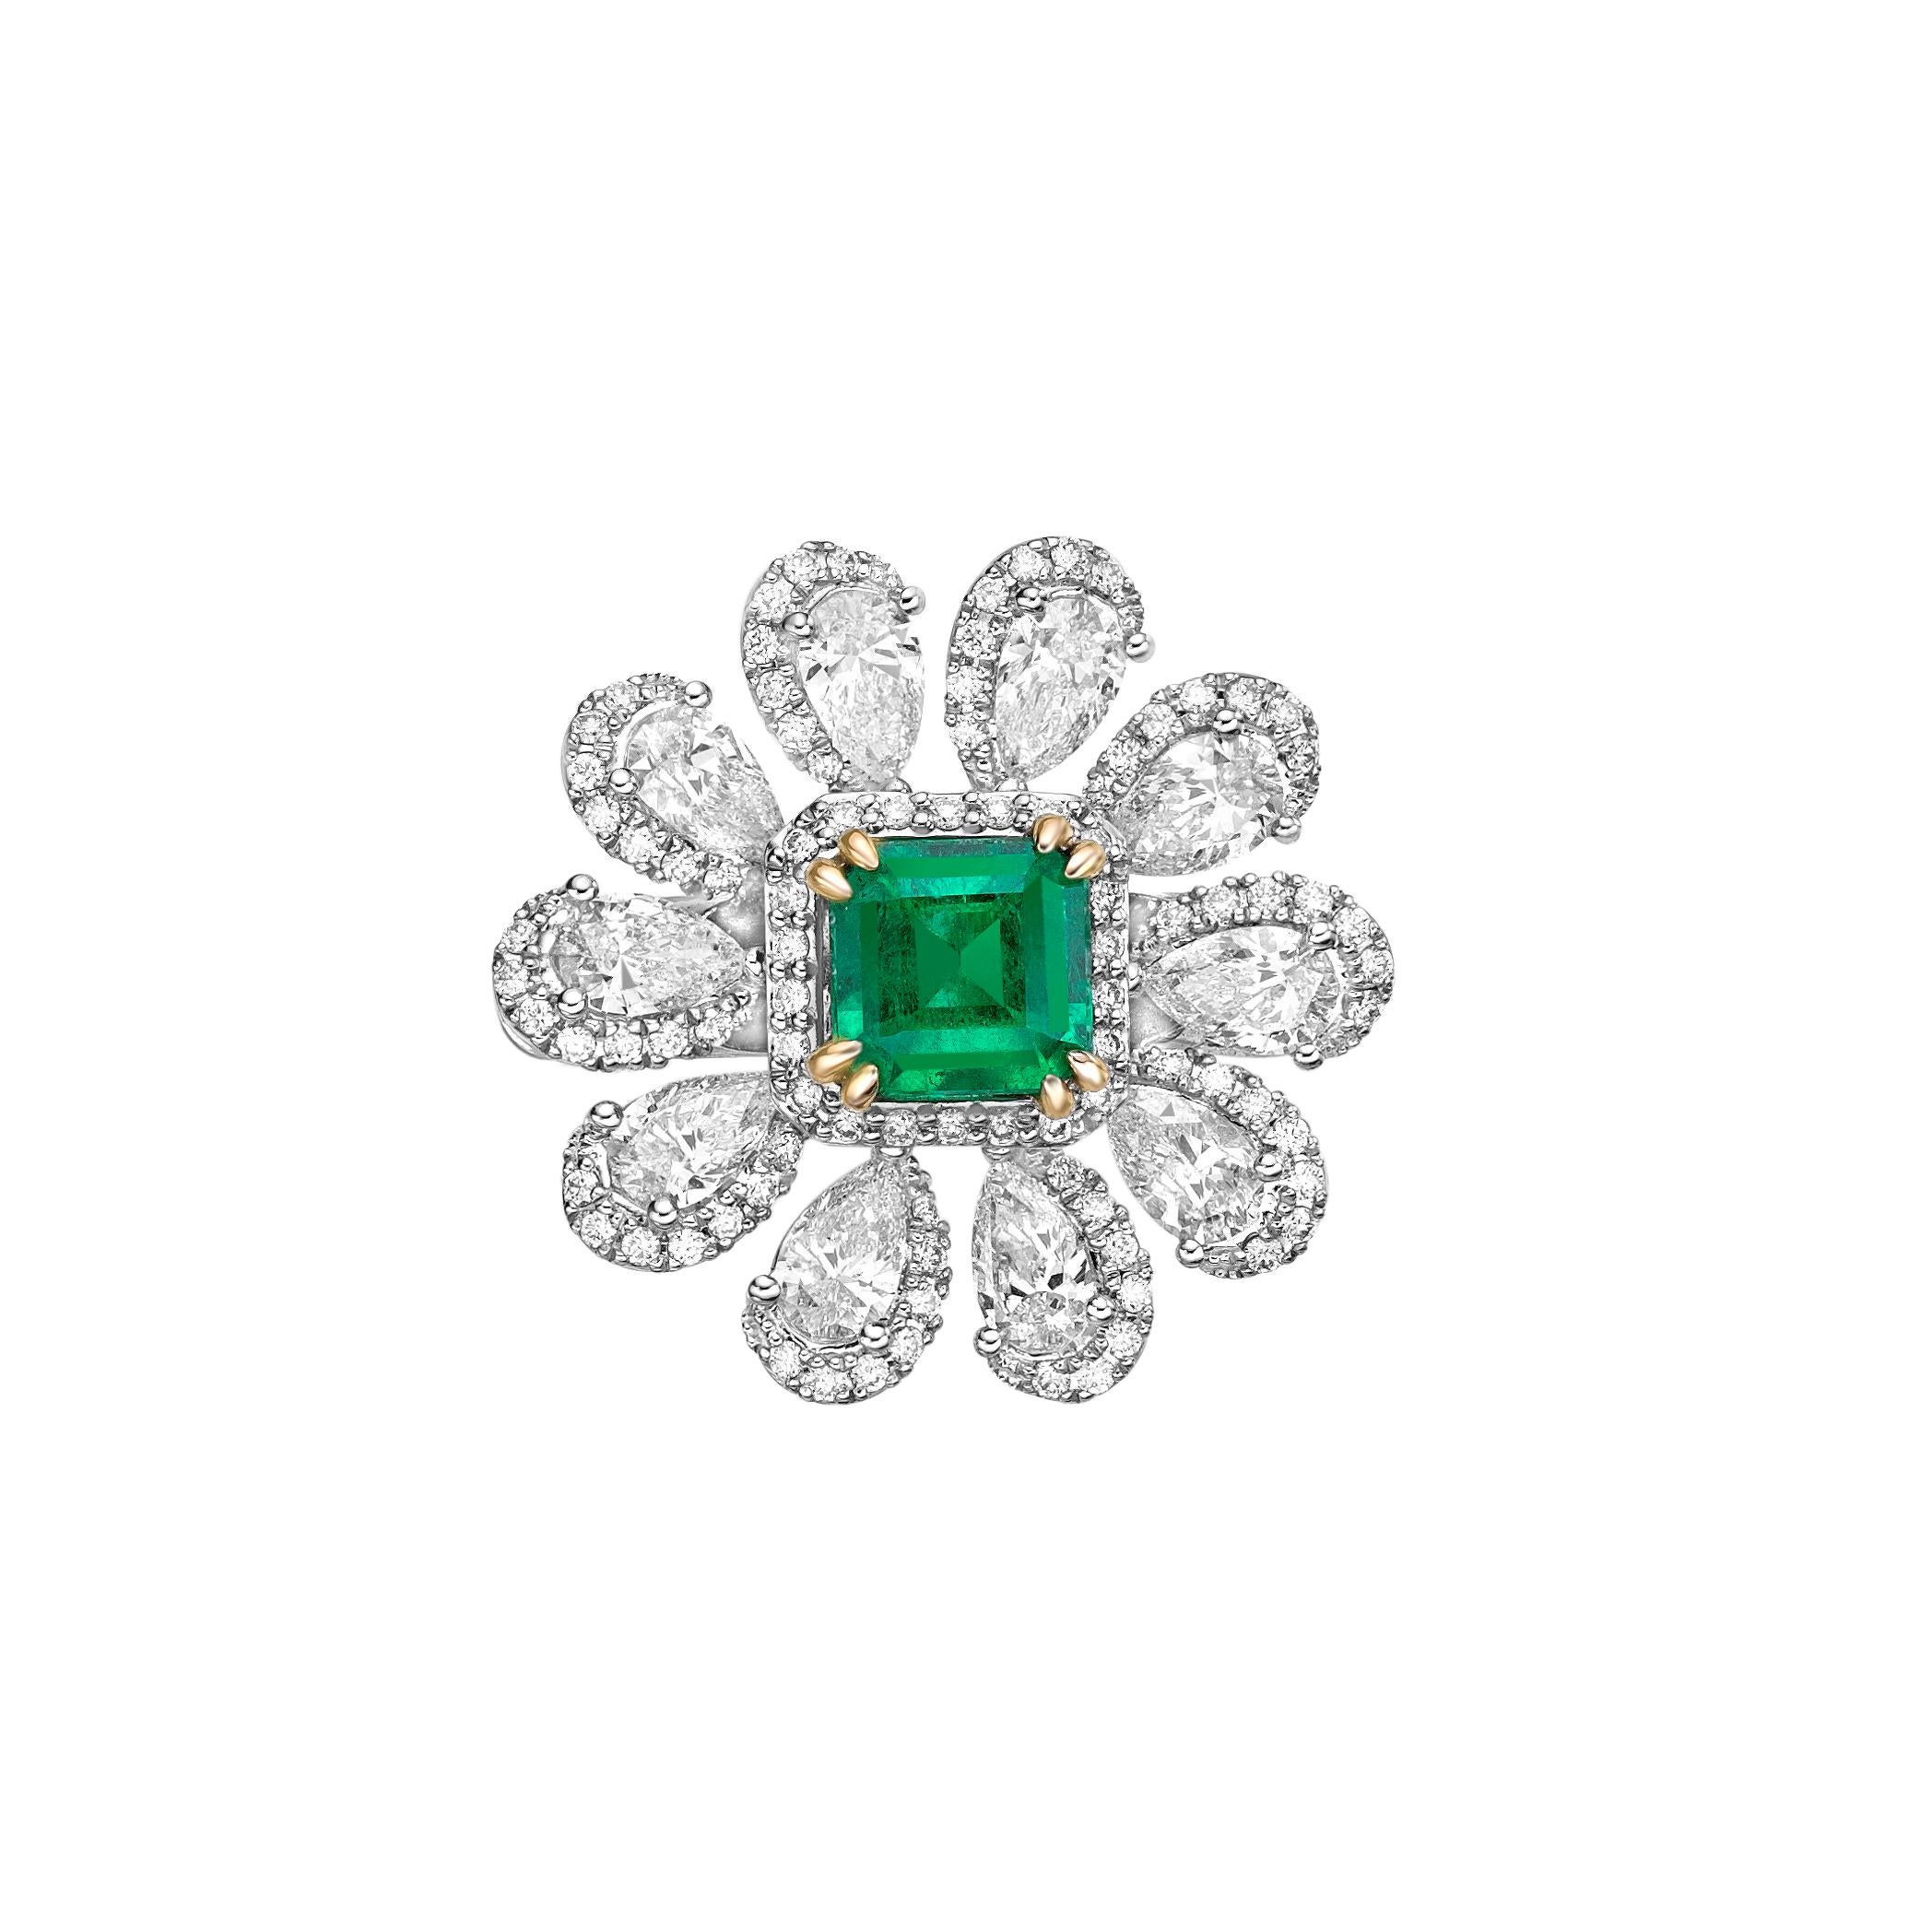 Contemporary 1.28 Carat Sunflower Emerald Bridal Ring in 18KWYG with White Diamond. For Sale